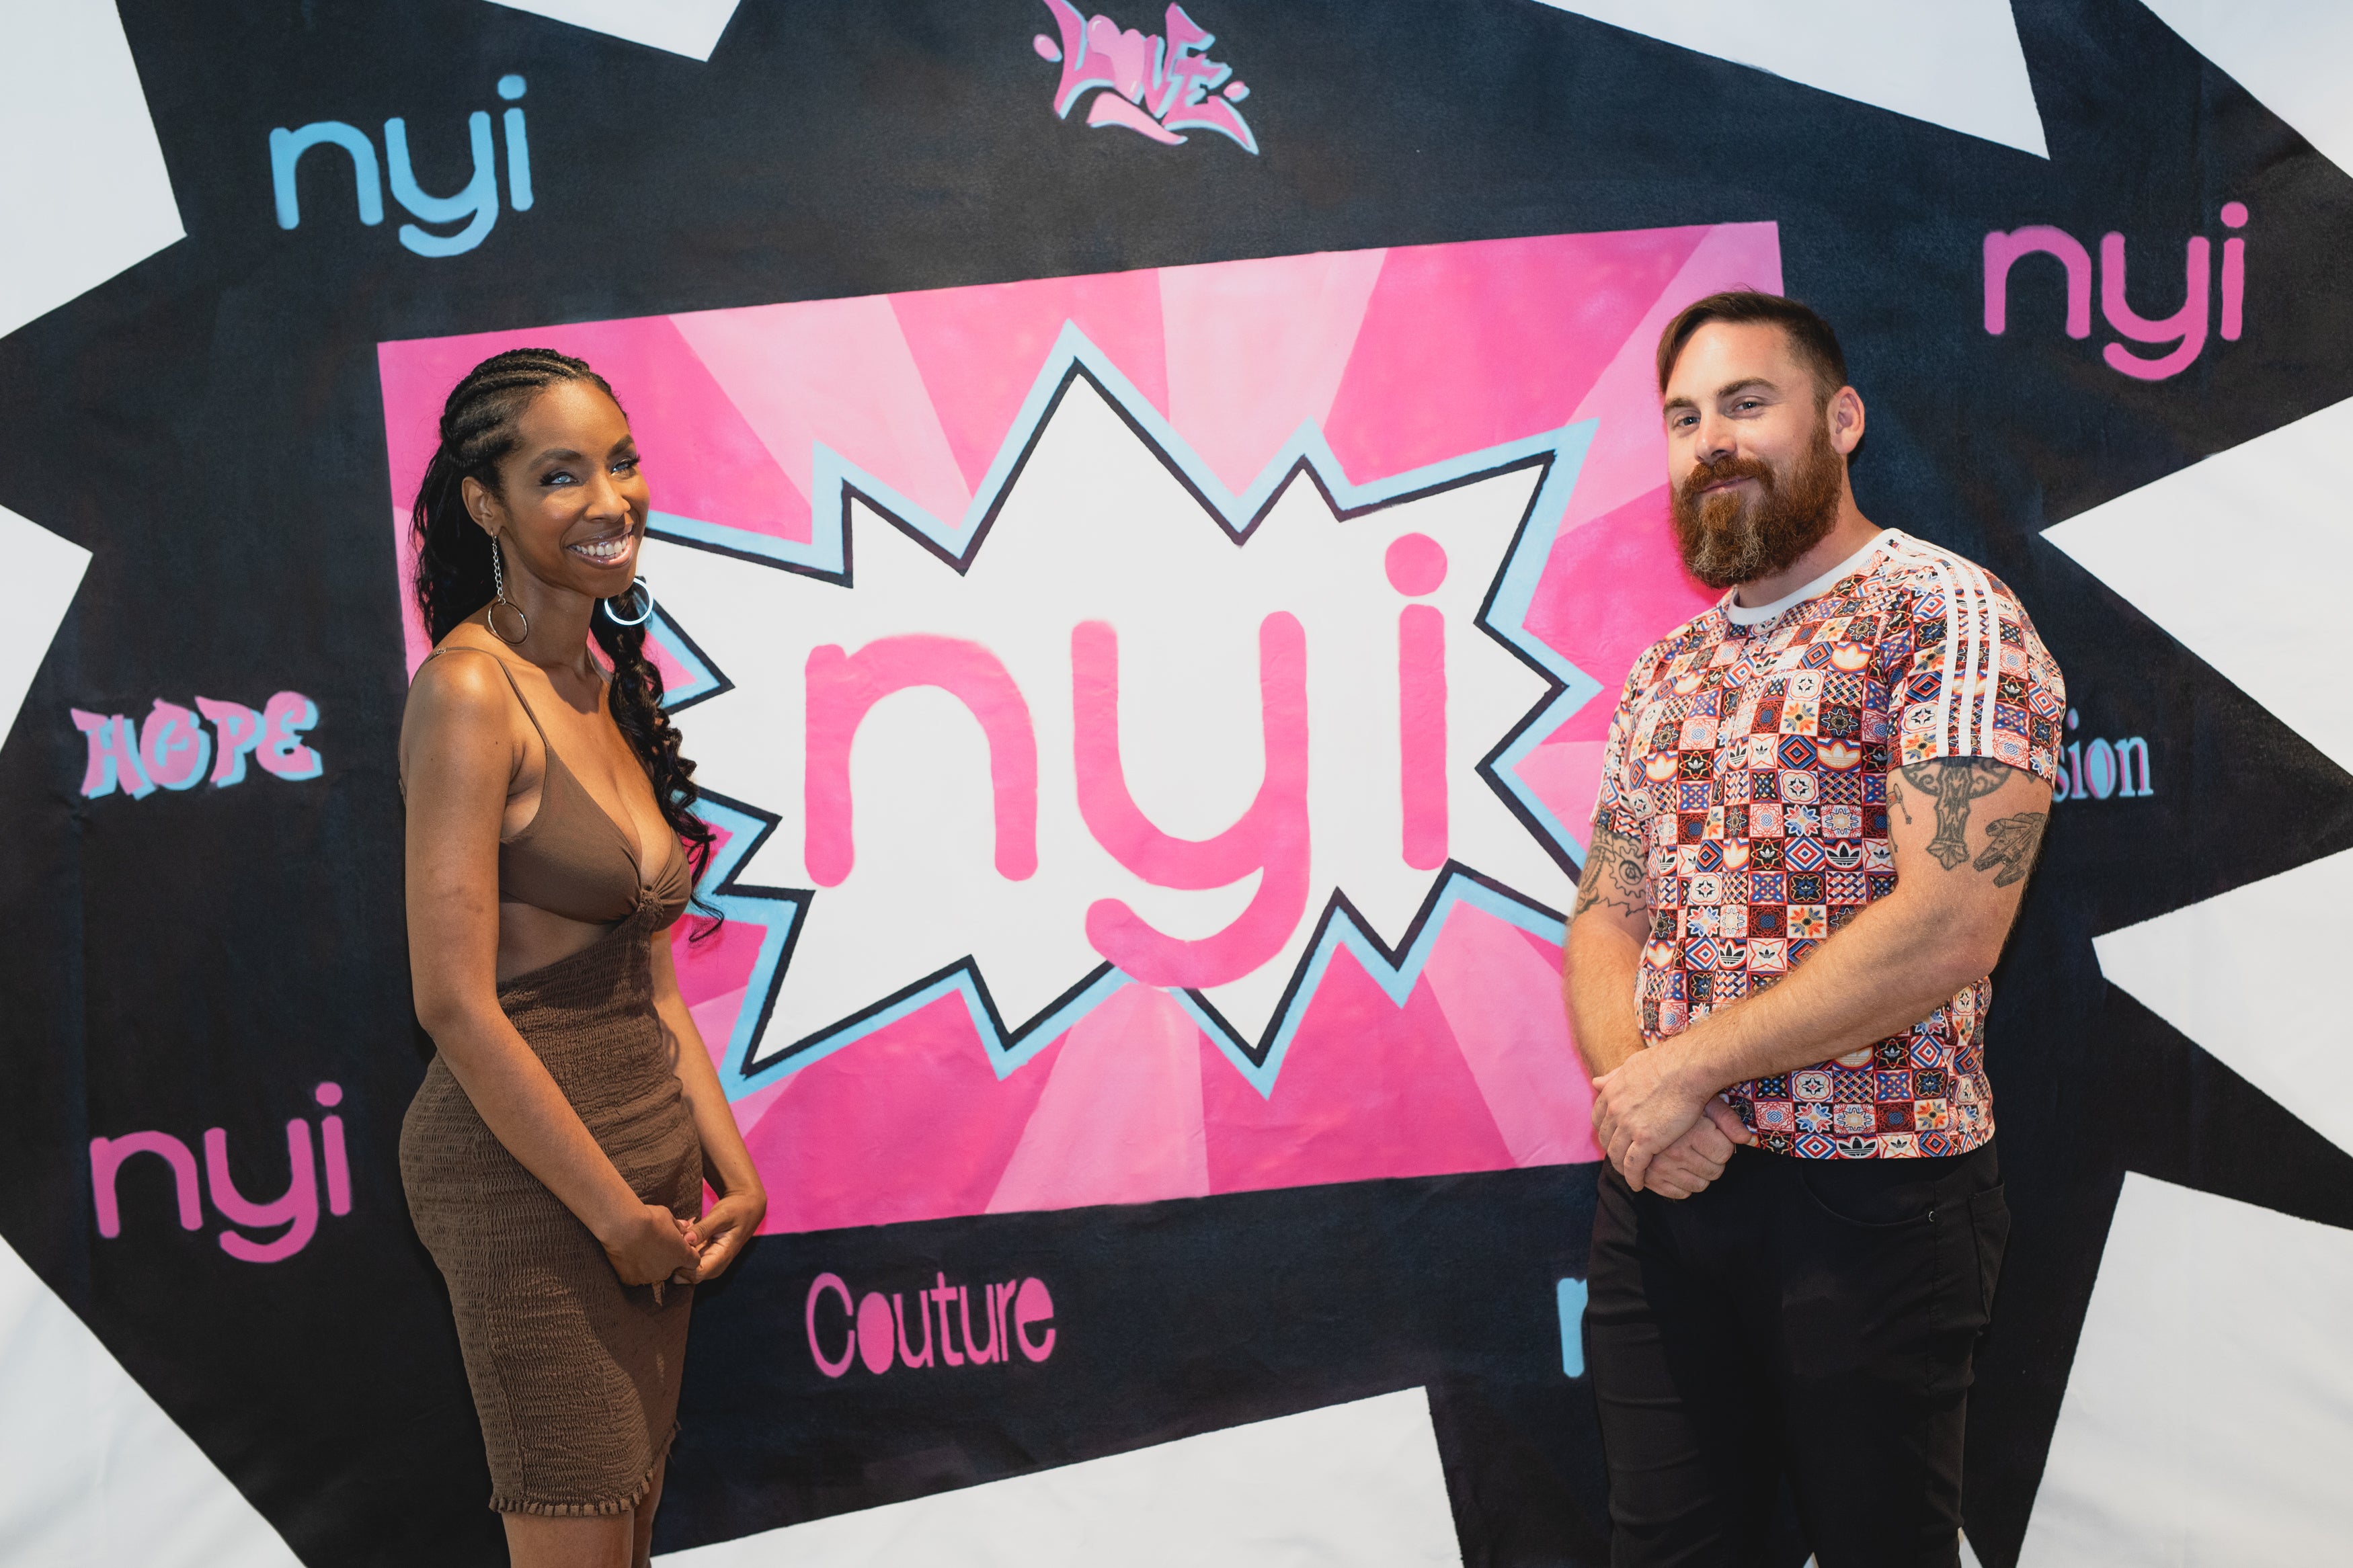 A black woman is standing on the left side front of a pink and blue pop art style backdrop with N Y I in large letters. She is wearing a brown dress, large hoop earrings, and high heels with her hand on her hip. A white man with a red beard and short brown hair wearing a multicolored shirt with black pants stands to the right.